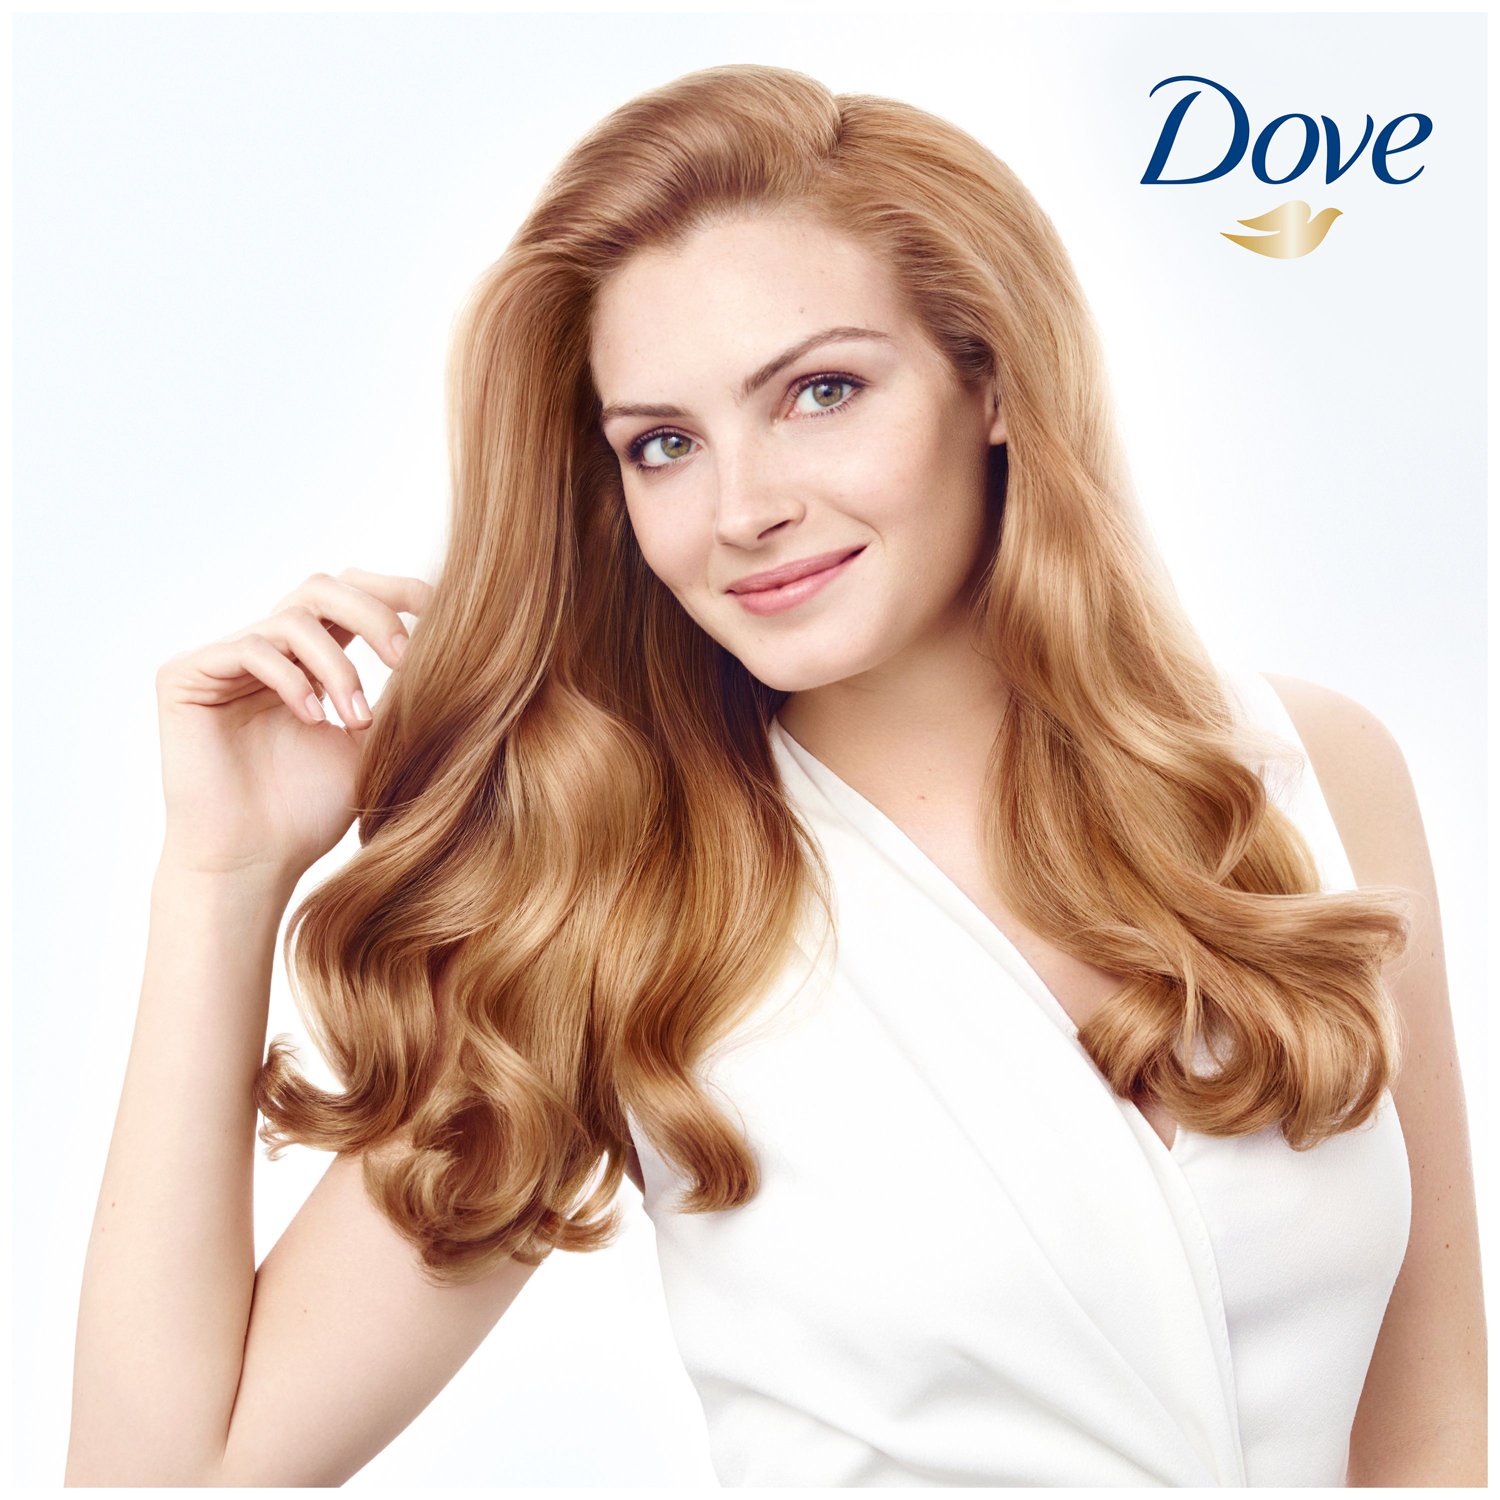 Dove Style+Care Curls Defining Hair Styling Mousse, 7 oz - image 2 of 8